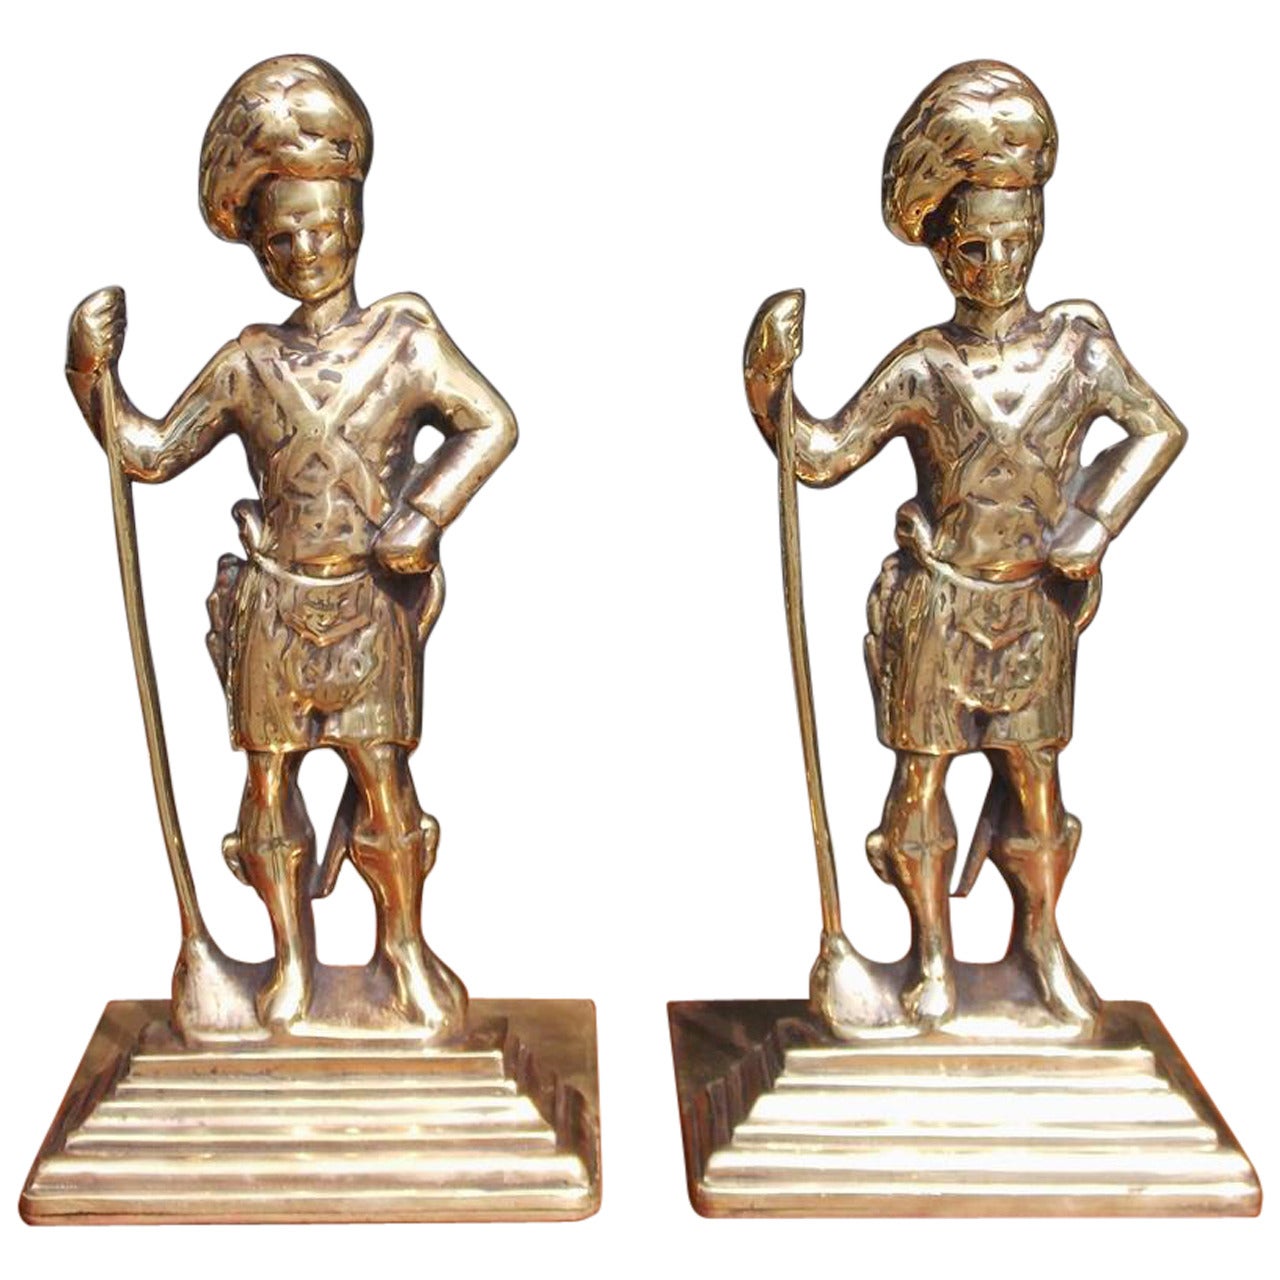 Pair of Brass Scottish Highlander Royalty Guards Bookends, Circa 1840